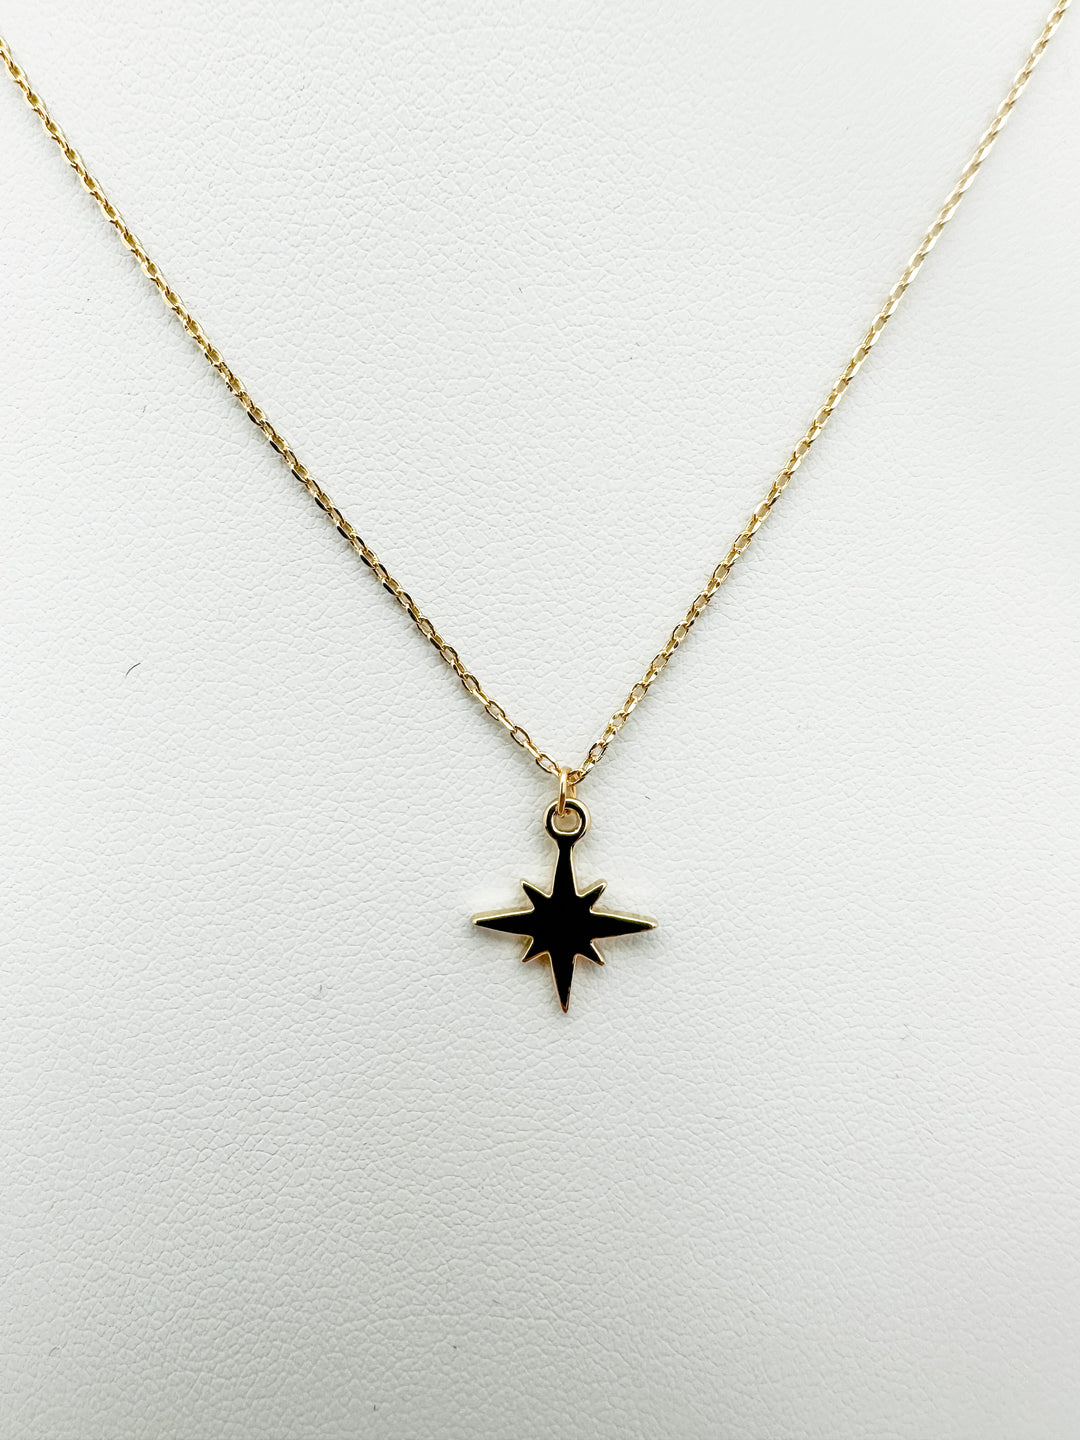 Northern Star Charm Necklace